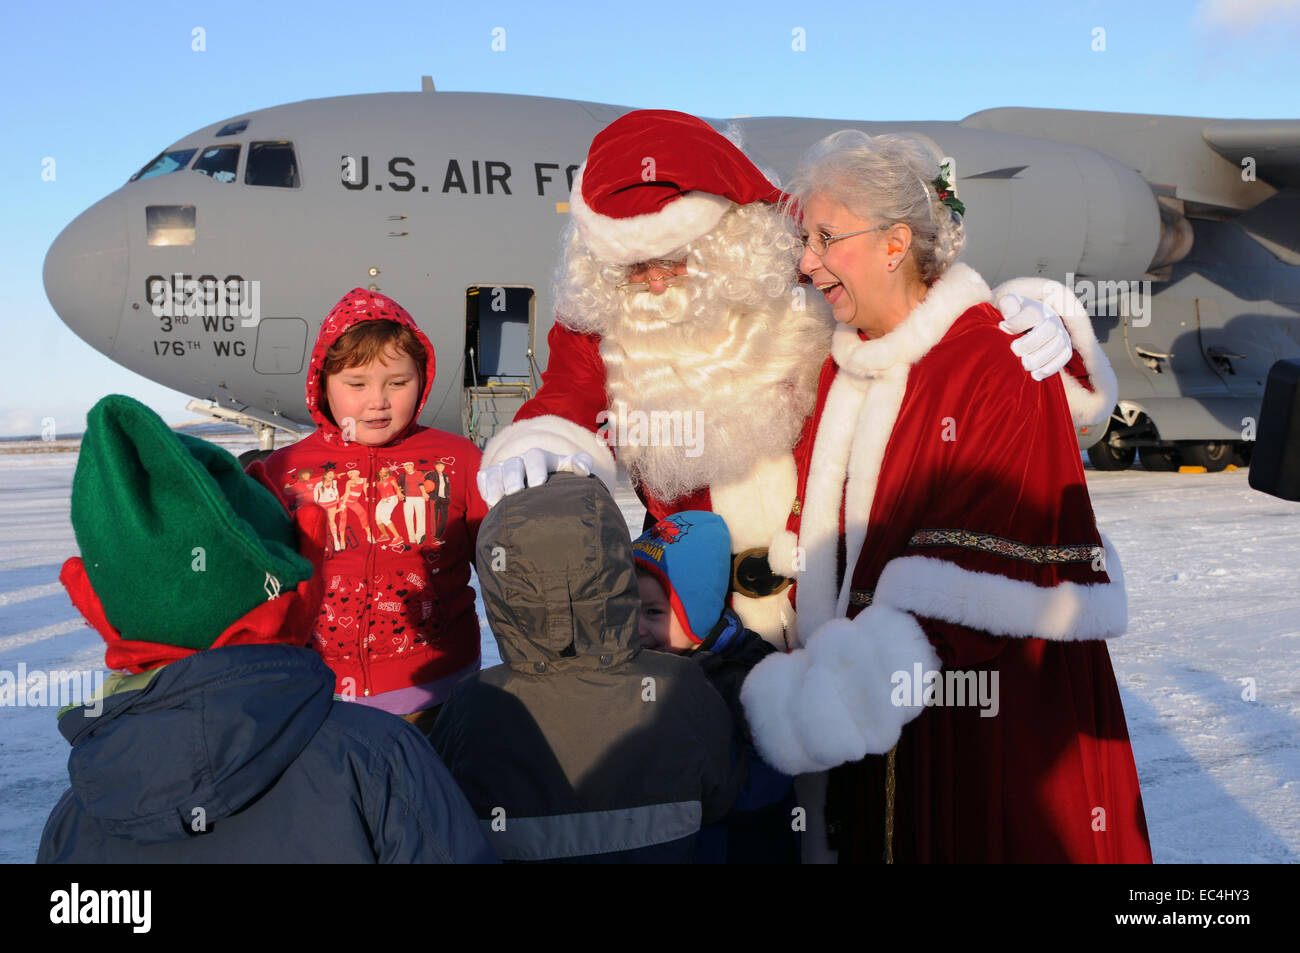 Santa Claus and Mrs. Claus greet children after arriving to a visit a remote Aleut native village as part of Operation Santa Claus November 6, 2010 in St. Paul Island, Alaska. Operation Santa Claus has delivered donated gifts to poor remote Alaskan villages by Air Force transport since 1951. Stock Photo